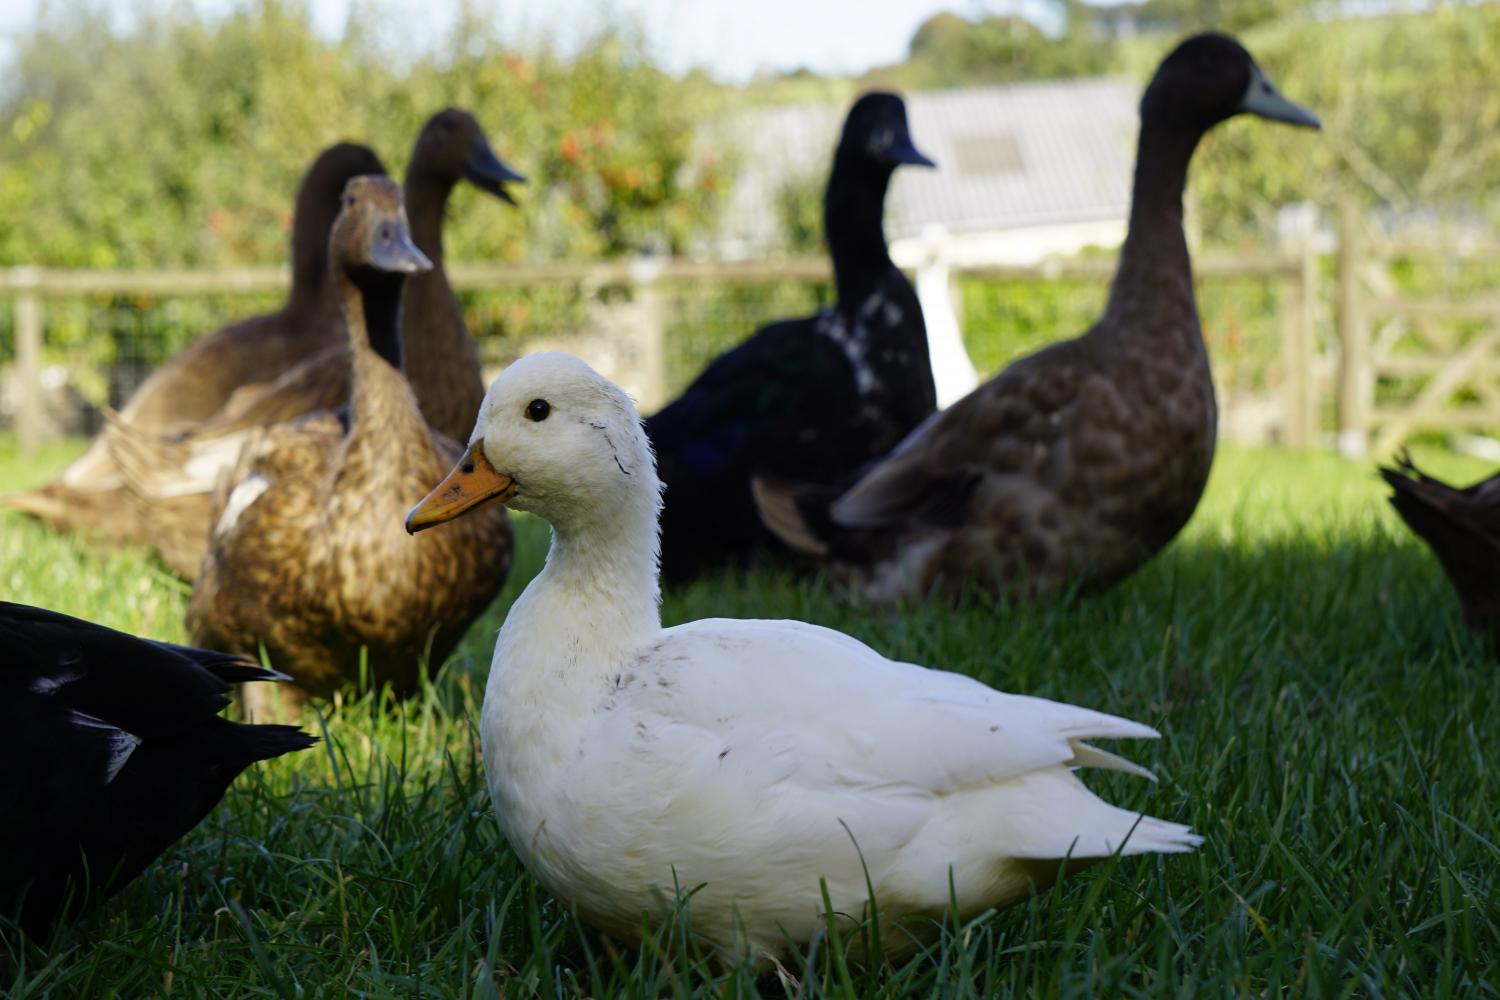 Ducks and Chickens at Little Bray can be fed by children